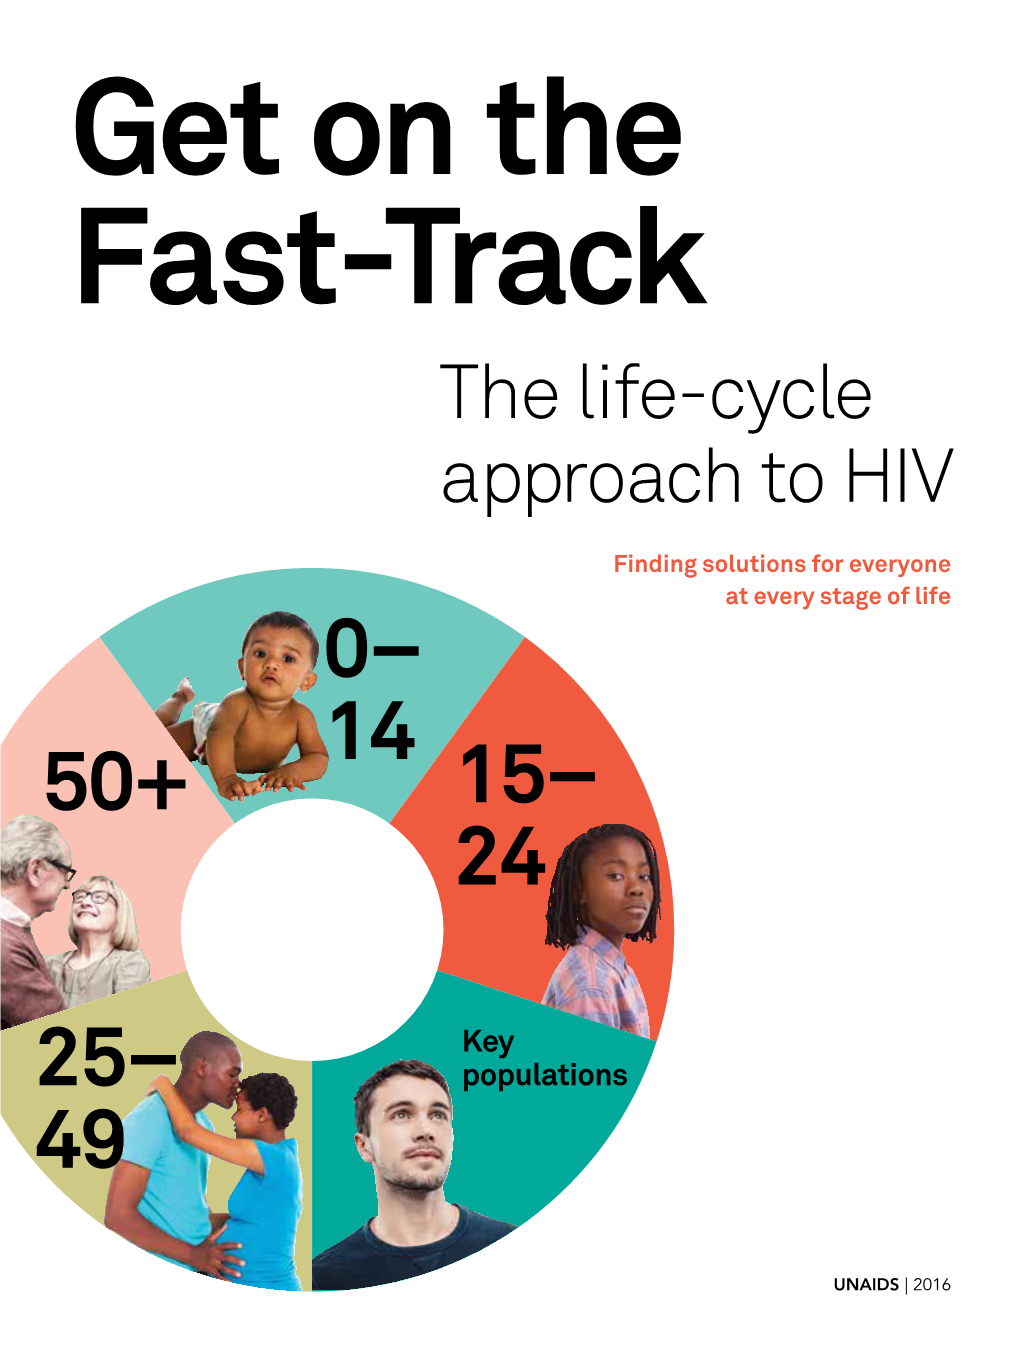 Get on the Fast-Track — the Life-Cycle Approach To